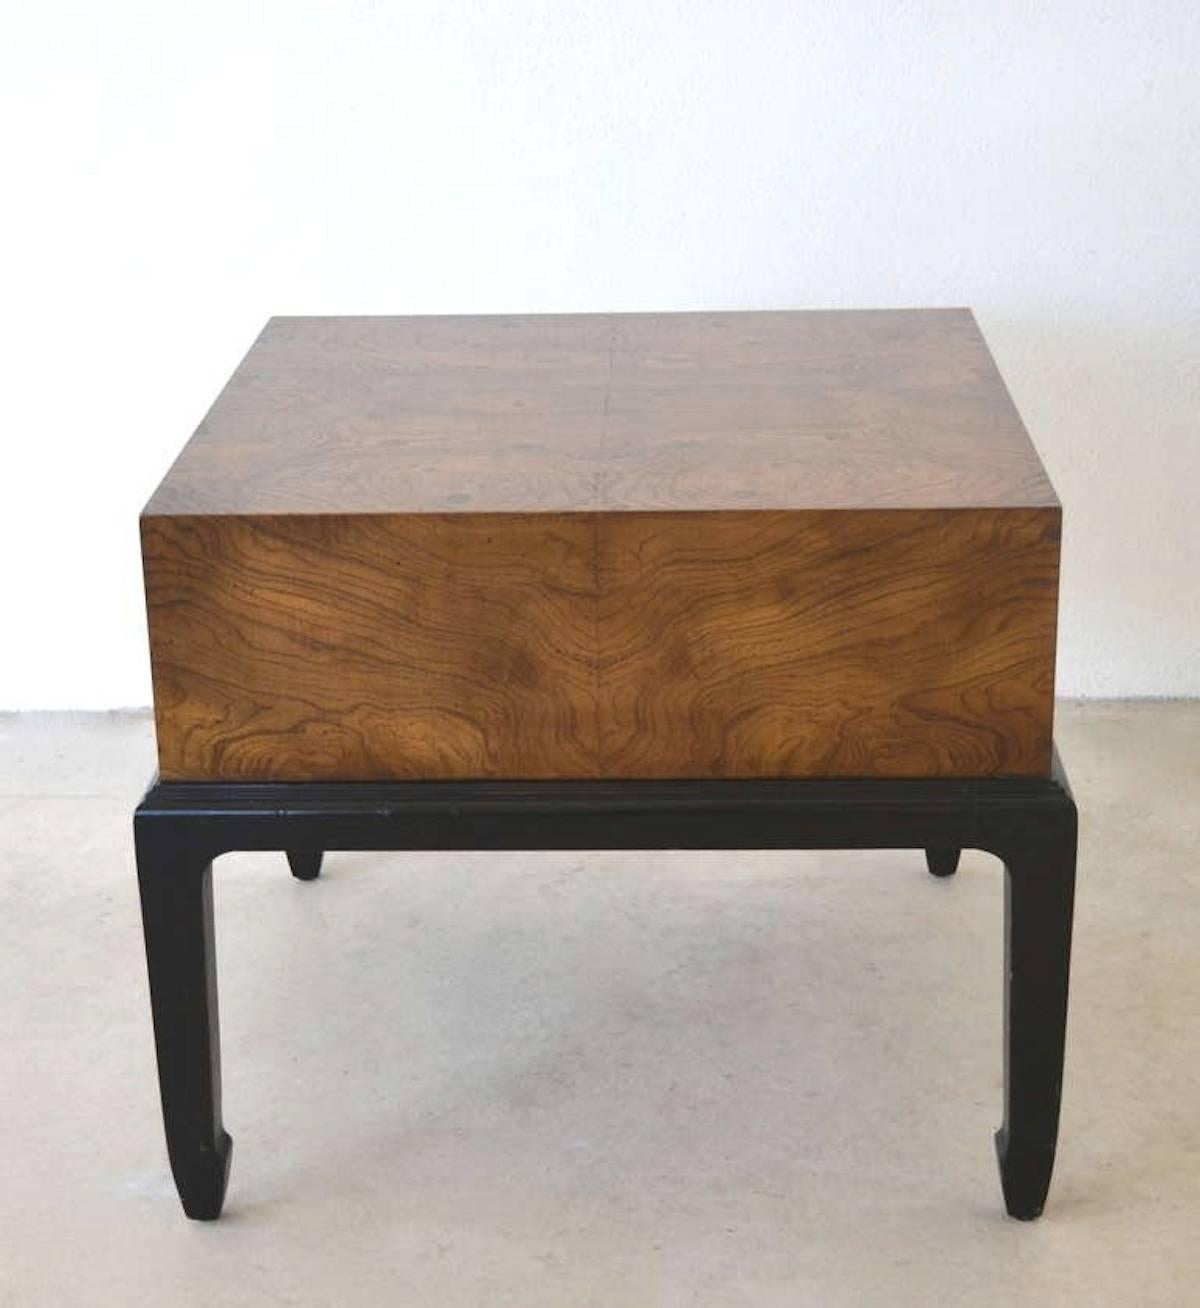 Midcentury Burlwood Side Table In Excellent Condition For Sale In West Palm Beach, FL